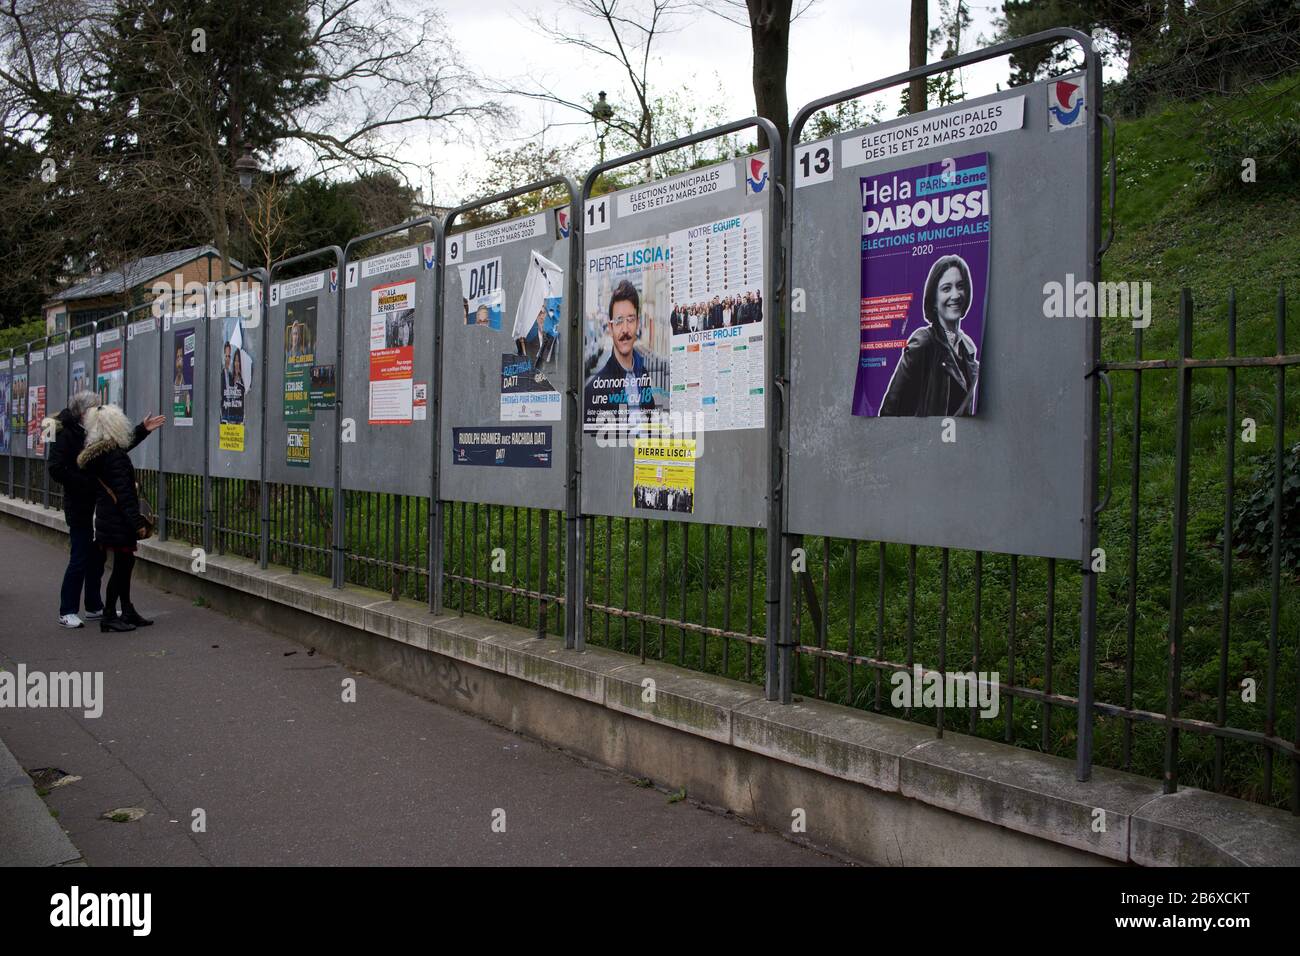 Paris prepares for French local elections amid coronavirus fears, rue Ronsard, 75018 Paris, France - March 2020 Stock Photo